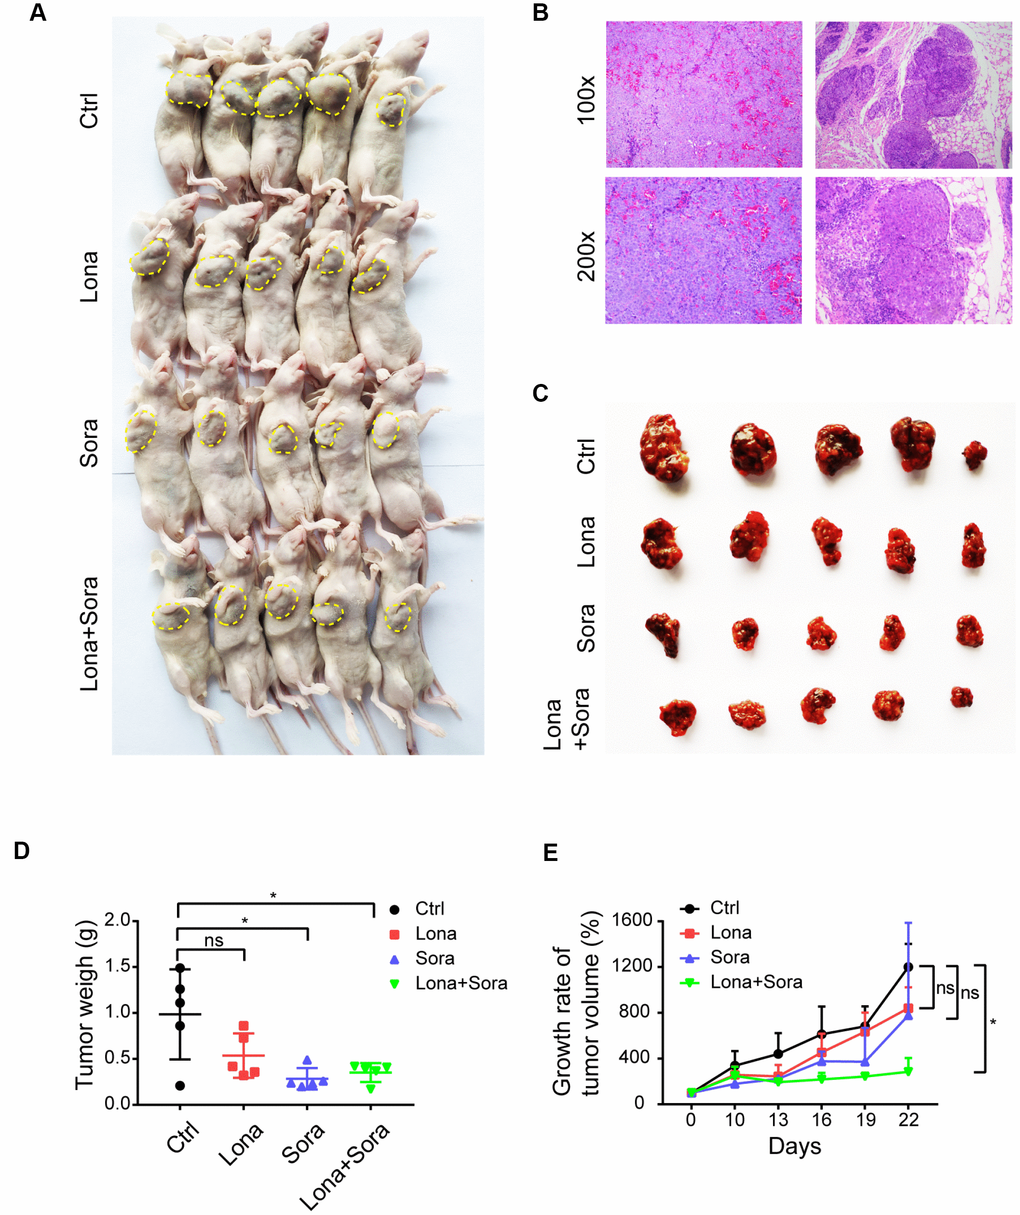 Co-treatment of lonafarnib and sorafenib suppresses HCC cell growth in vivo. (A) All mice used in the xenograft experiment were shown. The yellow dashed line depicts the border of palpable xenograft tumors. (B) Hematoxylin and eosin (H and E) staining of one xenograft tumor. (C) Isolated tumors from nude mice at the experimental endpoint. (D–E) Weights (D) and growth curves (E) of xenograft tumors from nude mice at the experimental endpoint. ns, P > 0.05; *P 